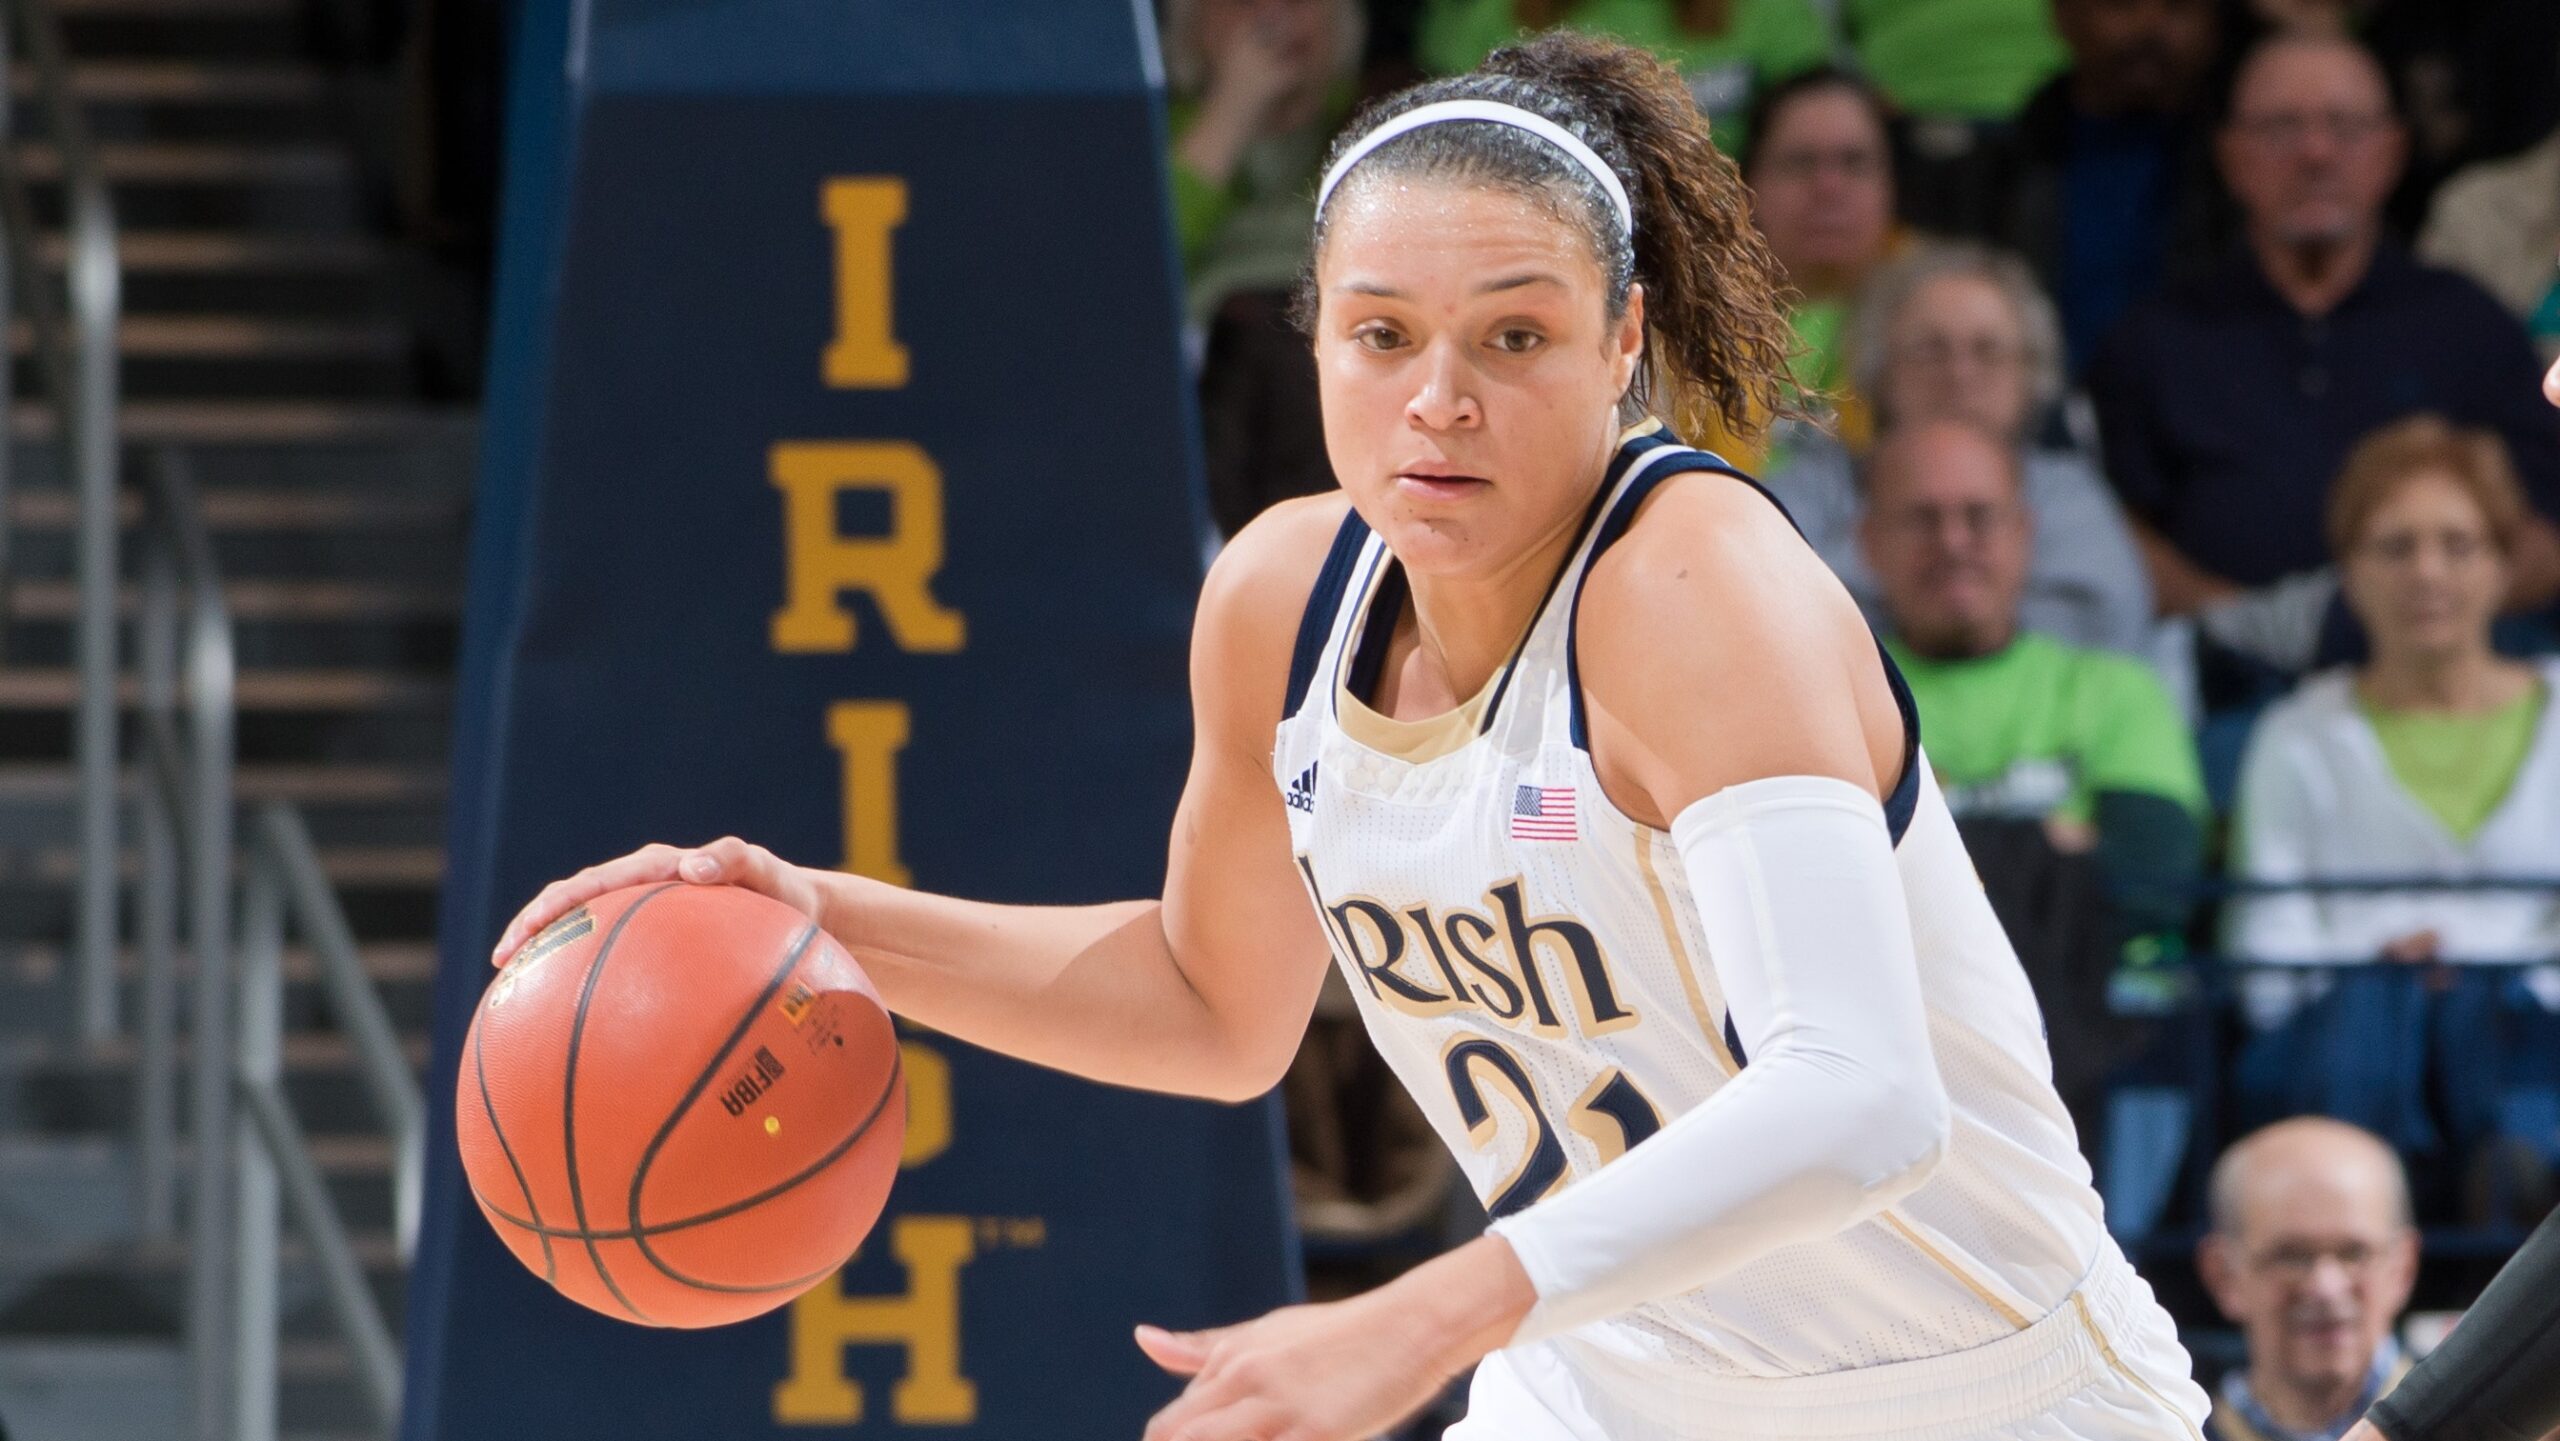 Dishin & Swishin Q&A looks at the Class of 2014:  Can Kayla McBride lead Notre Dame to a title?